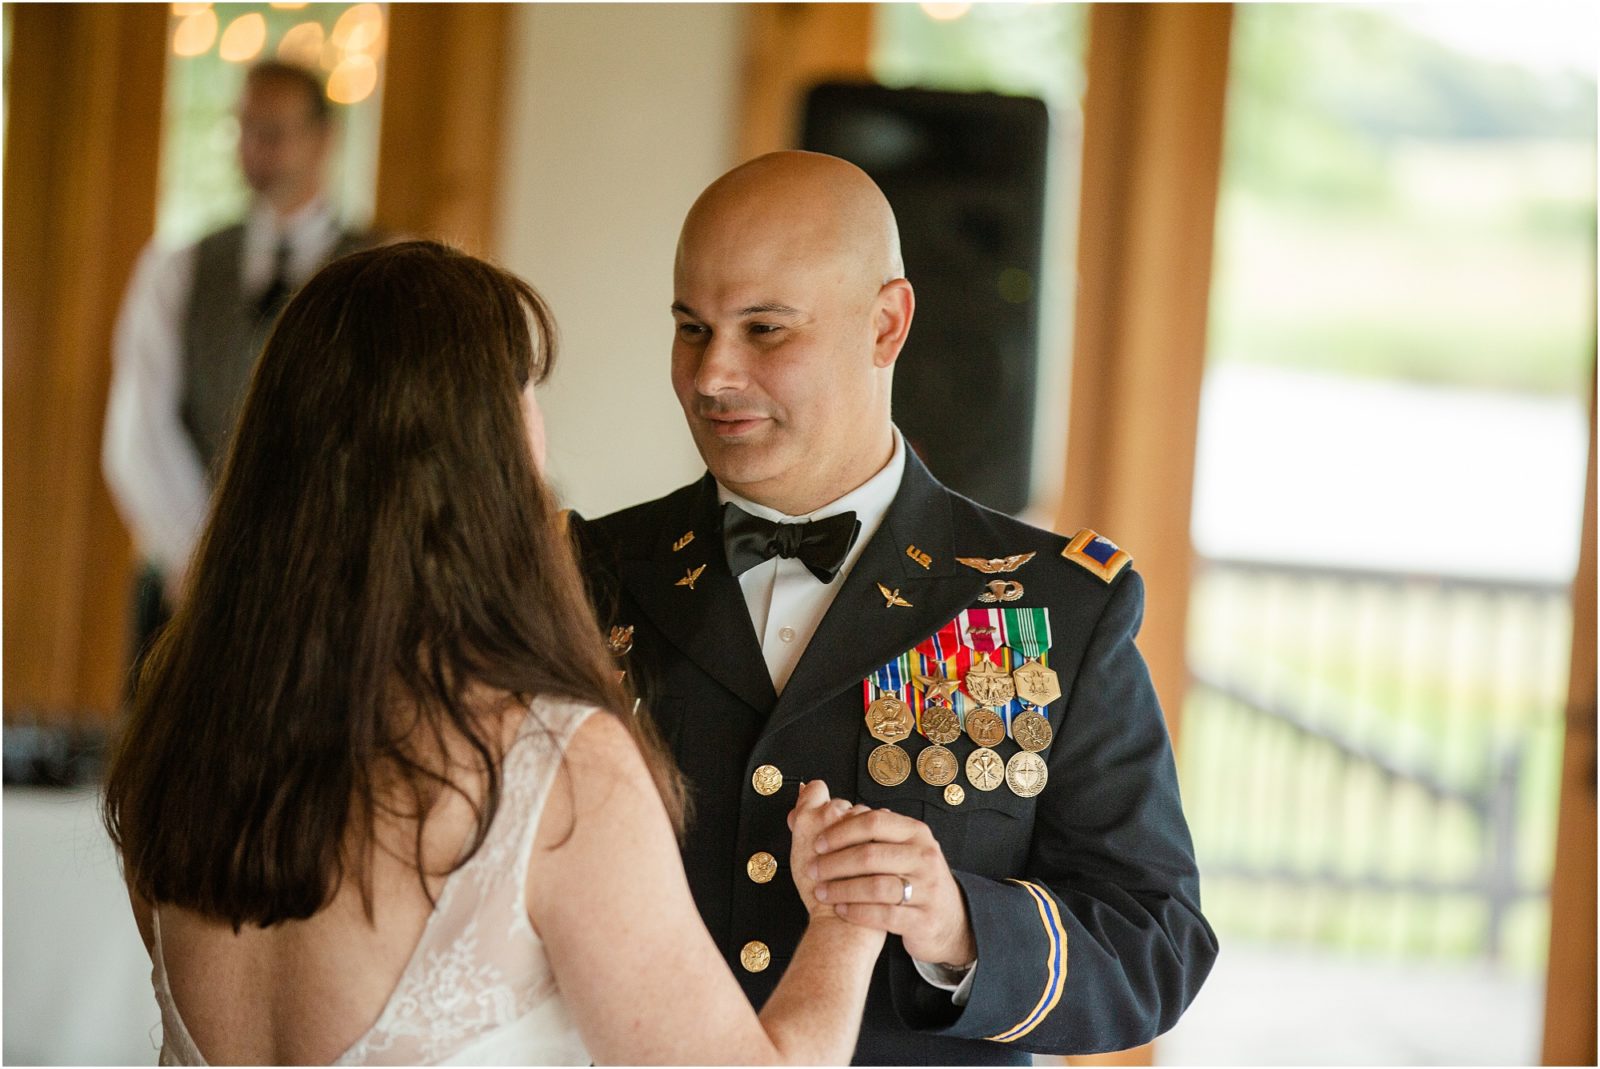 Military husband dancing with bride